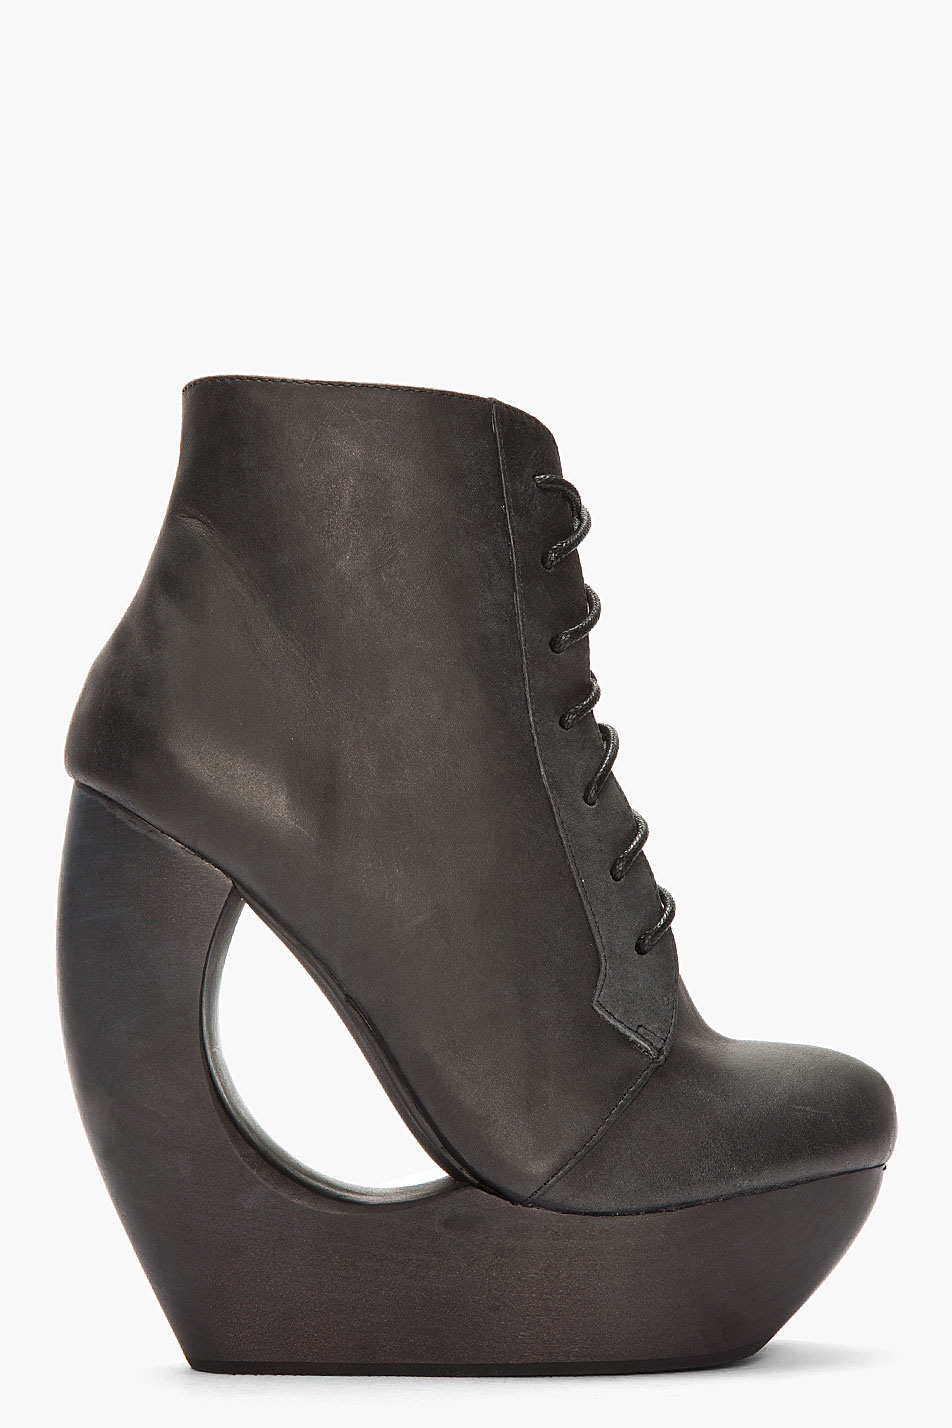 Jeffrey Campbell Black Leather Cutout Roxie Wedge Boots - Lyst